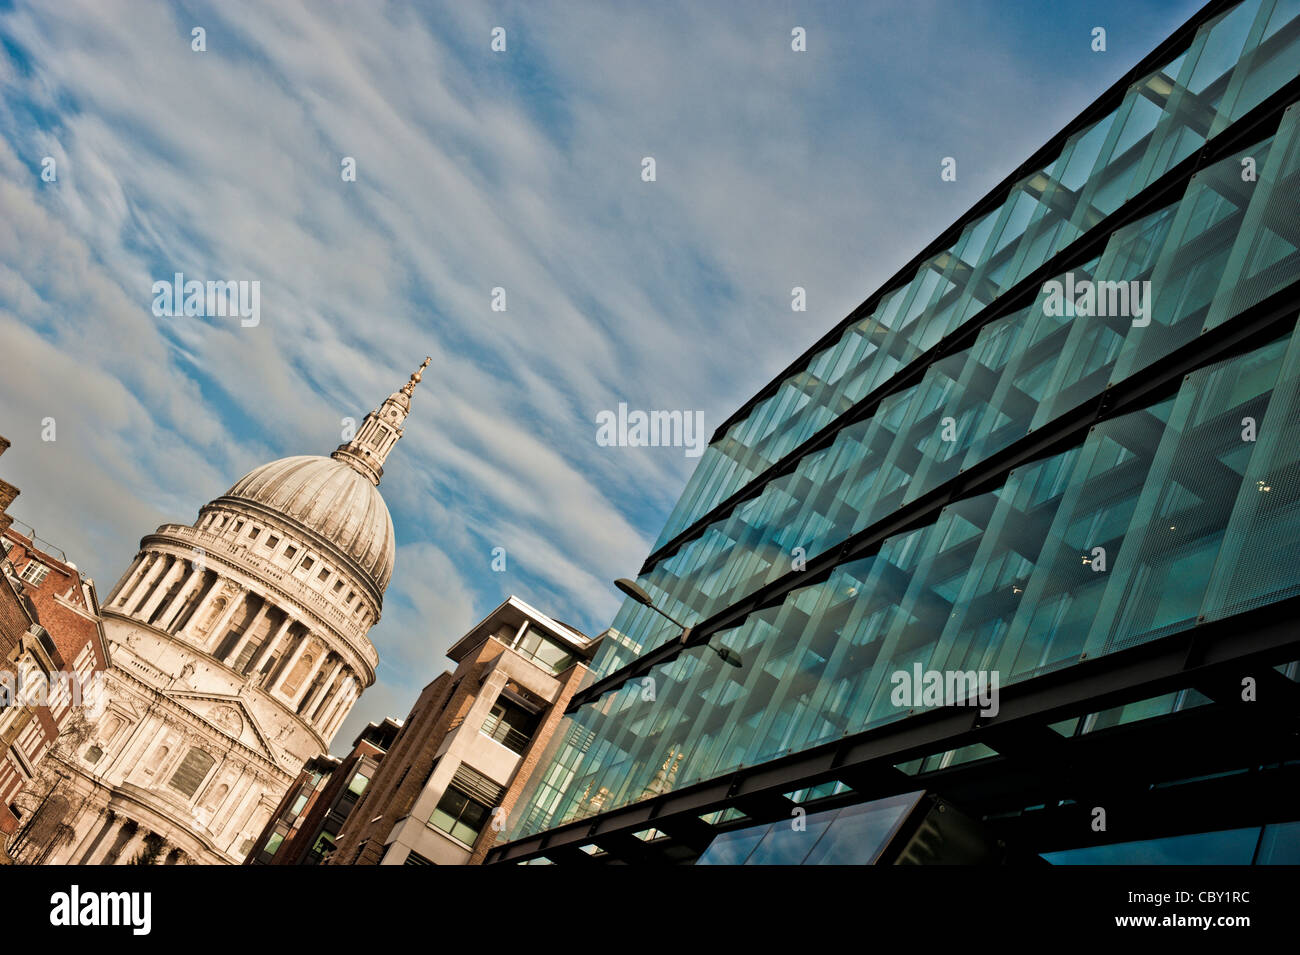 St Paul's Cathedral traditional architecture with contemporary glass and steel building of the Salvation Army HQ in the foreground. London. Stock Photo